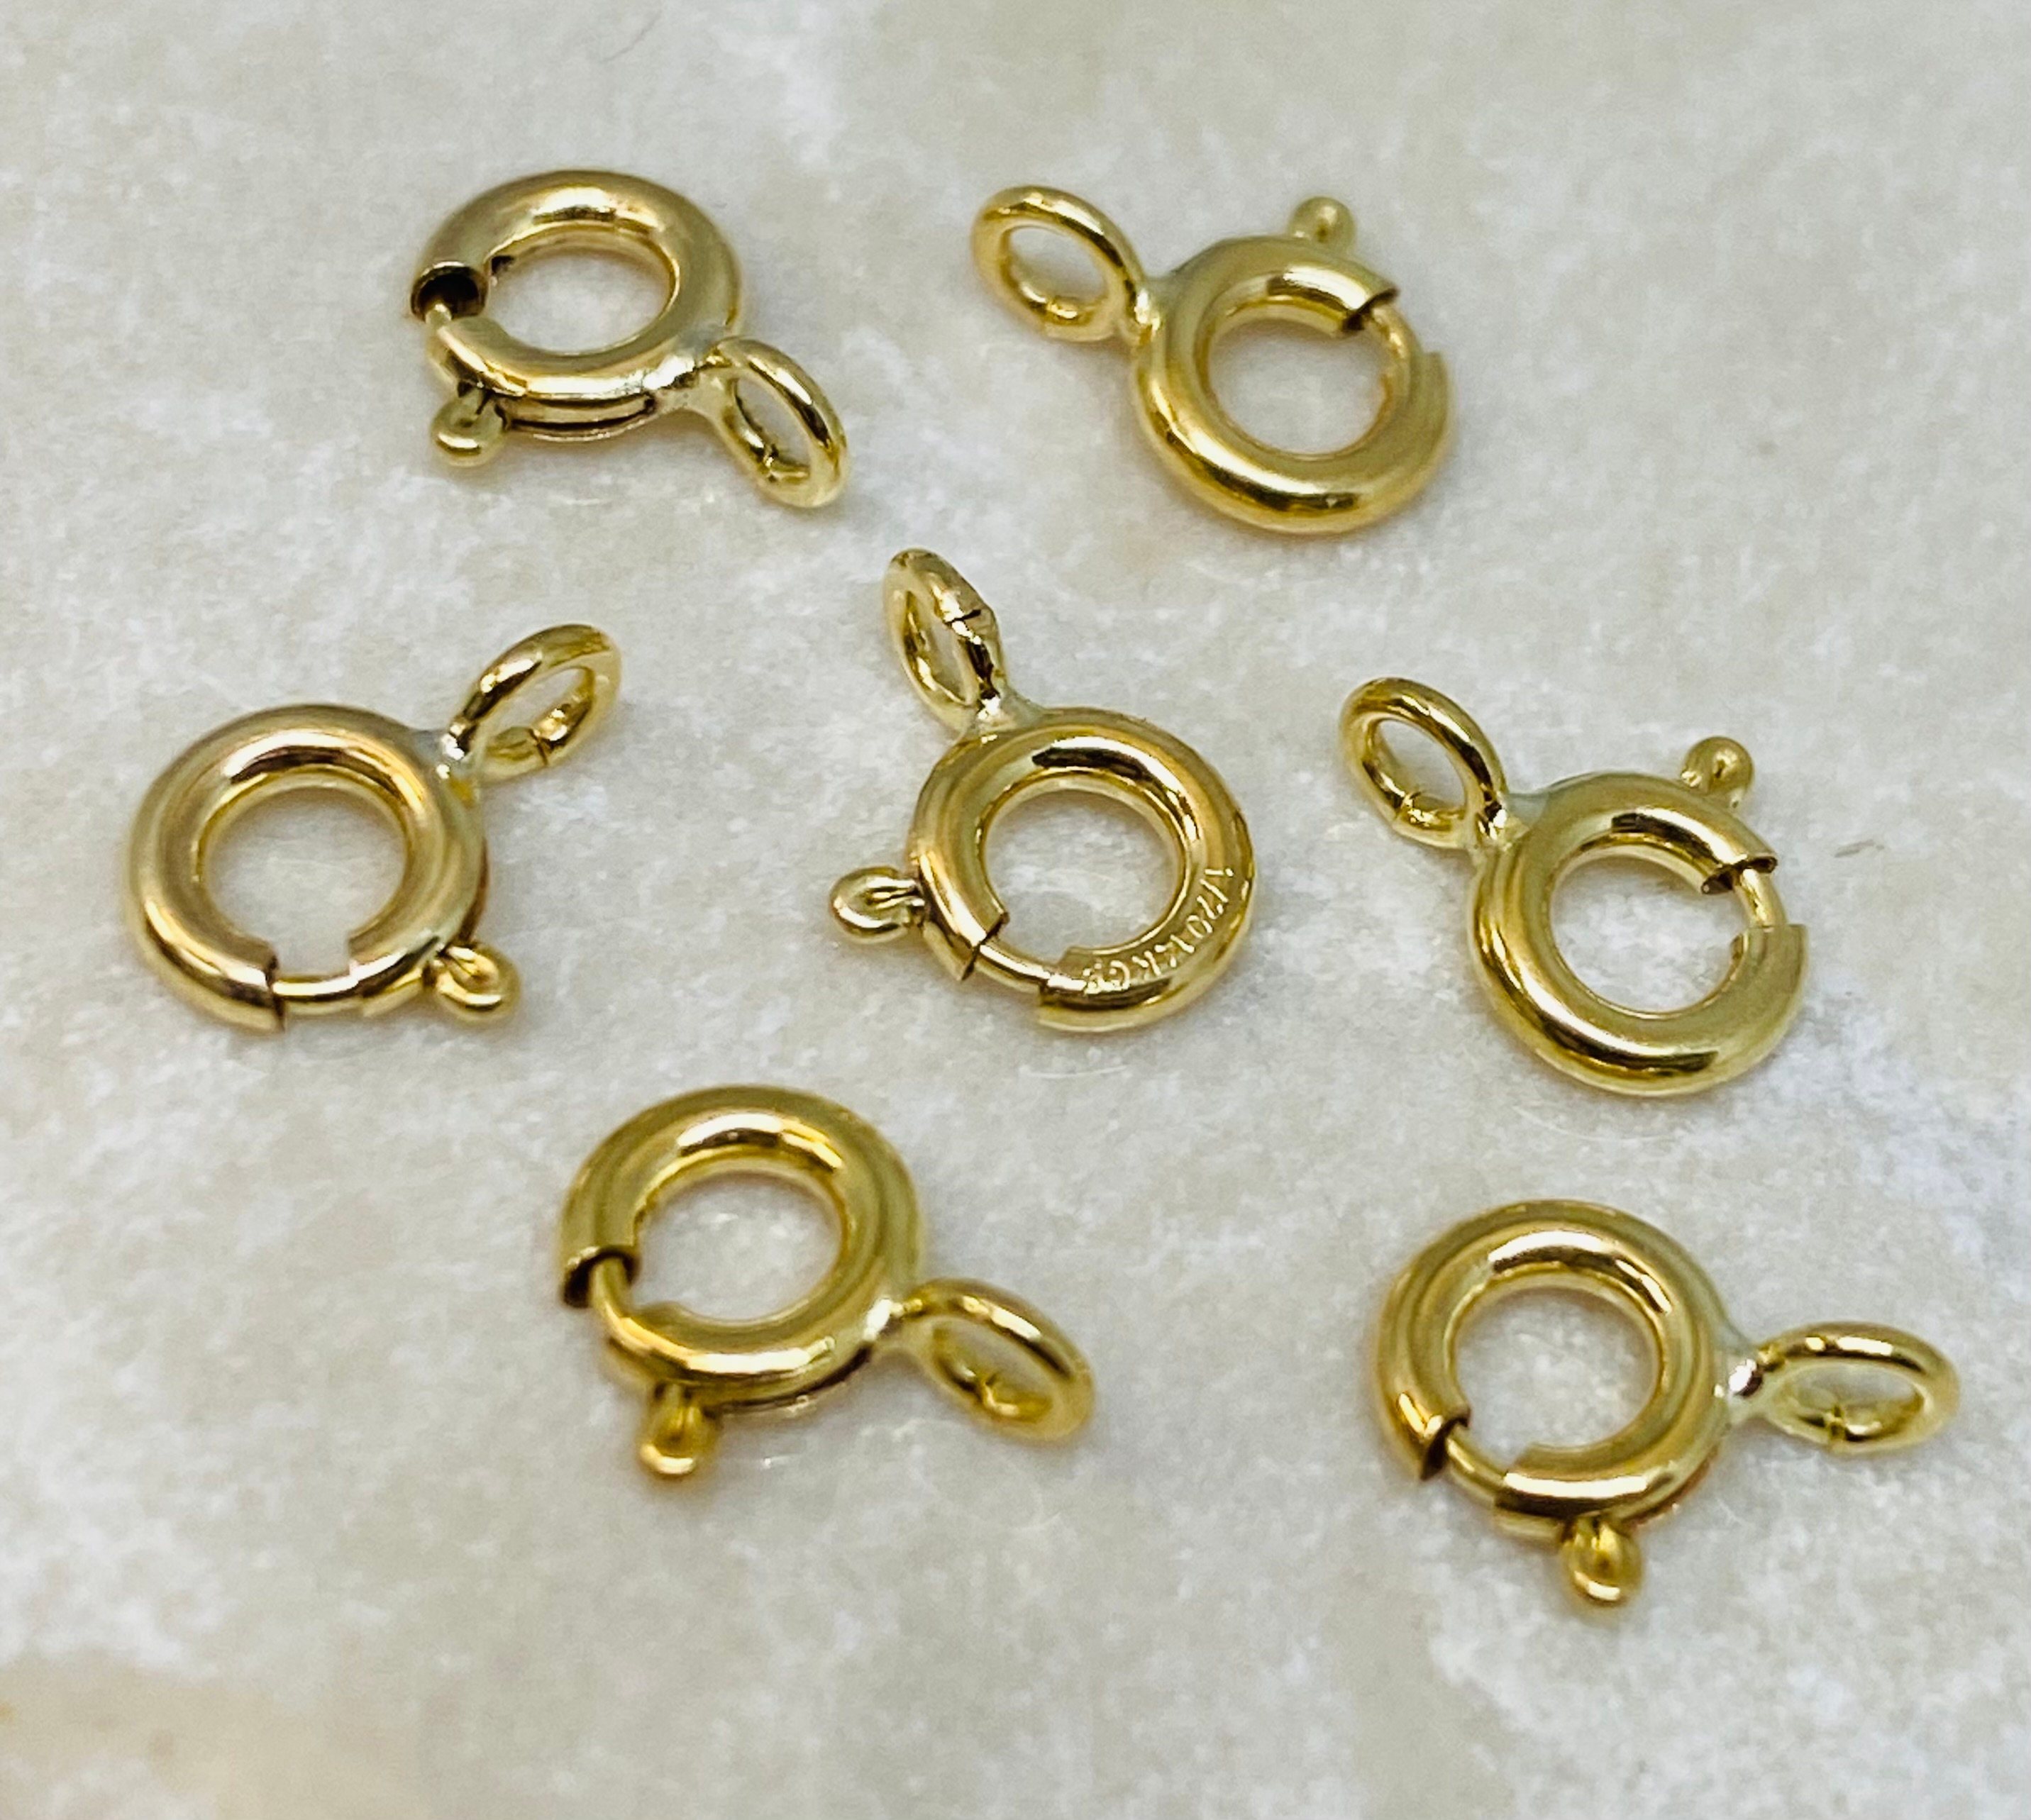 20pcs 14K Gold Filled Spring Ring Clasps with Open Closed Rings 5mm 6mm 7mm 8mm 